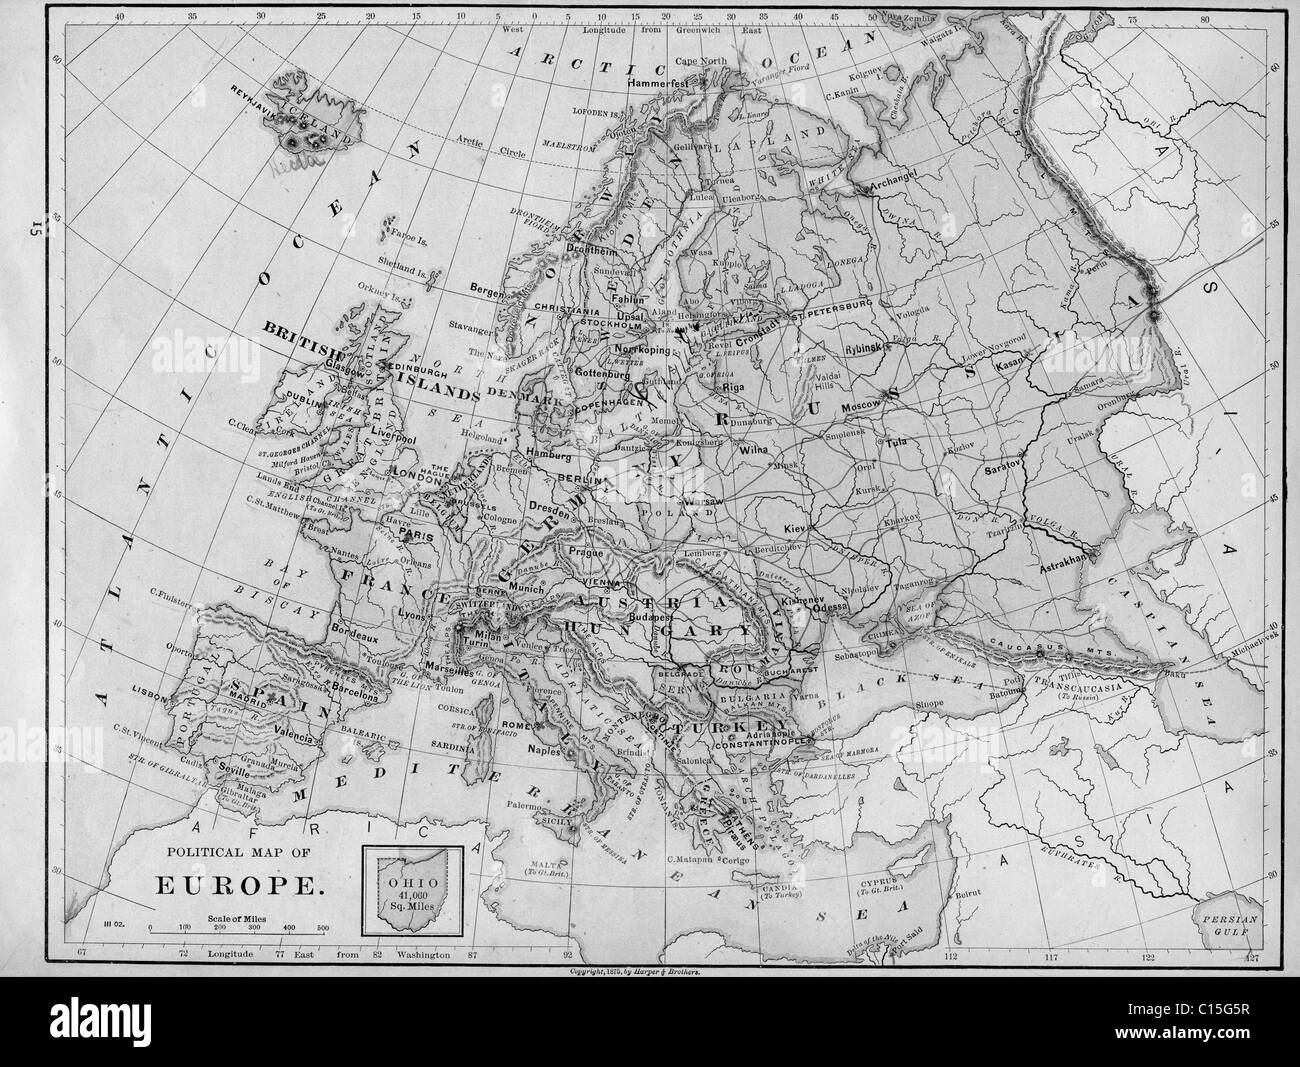 Old map of Europe from original geography textbook, 1884 Stock Photo